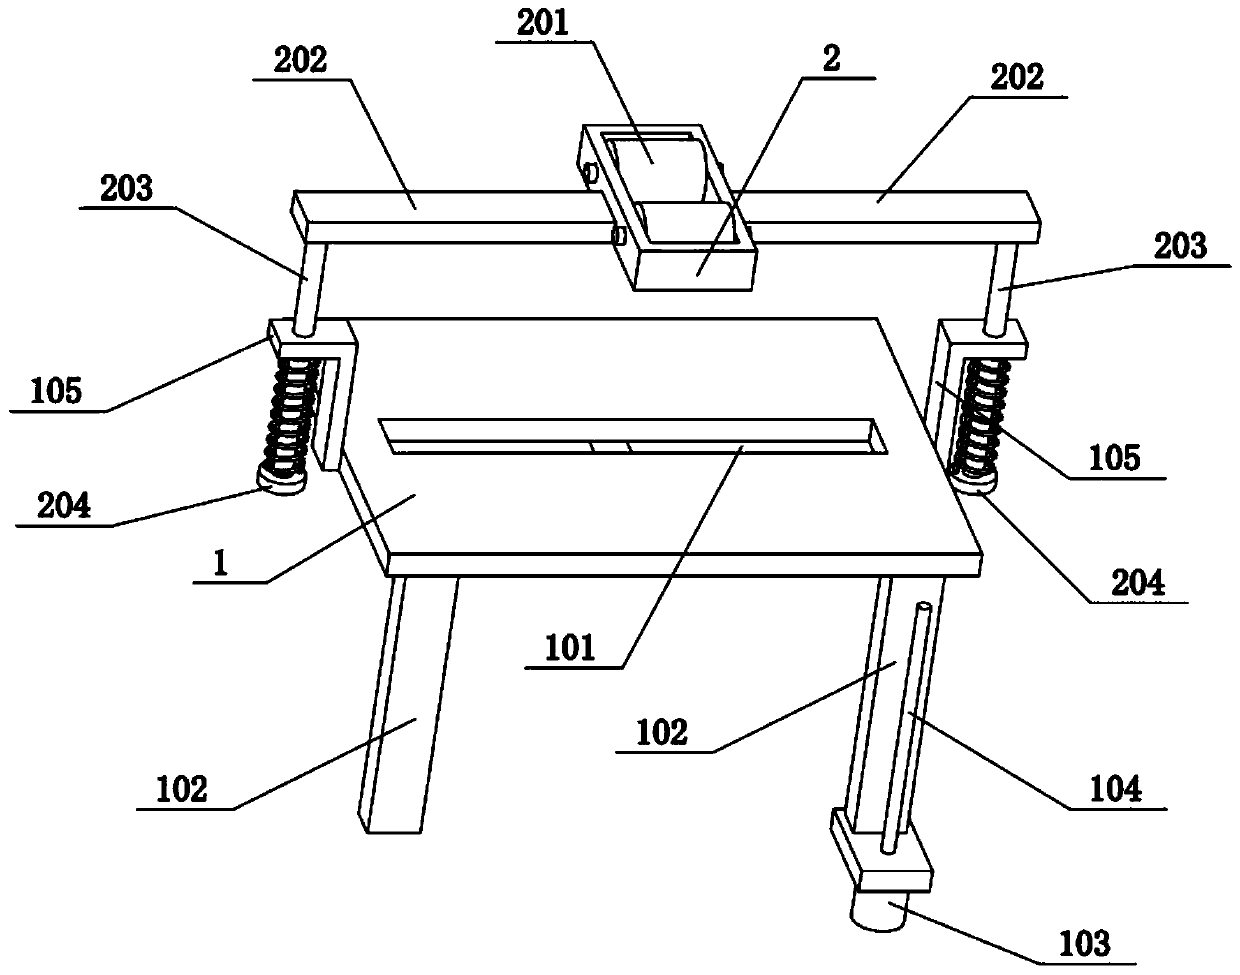 Large-scale battery mounting device